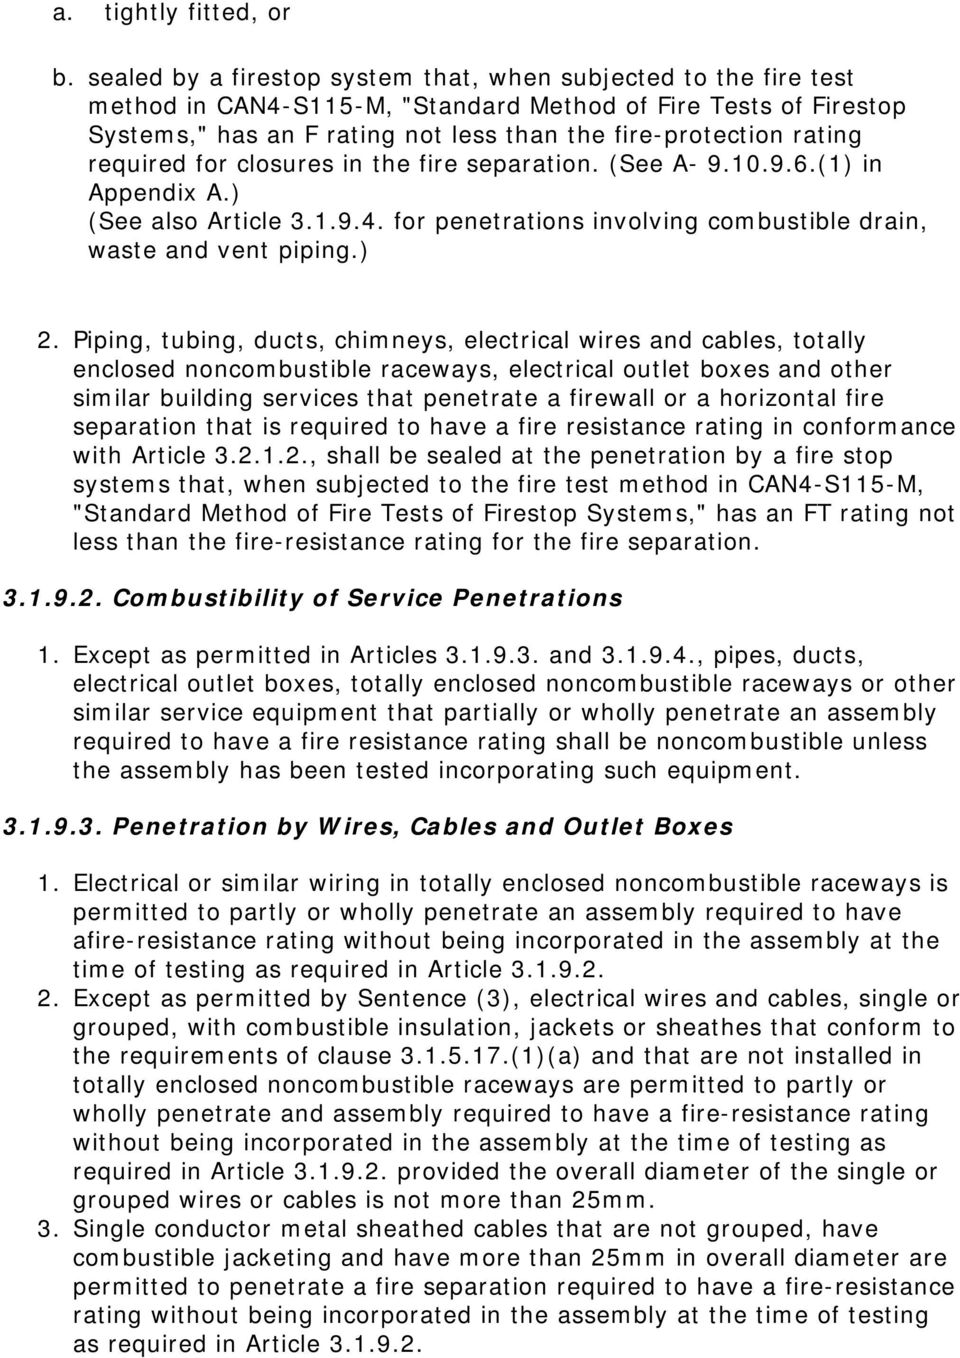 required for closures in the fire separation. (See A- 9.10.9.6.(1) in Appendix A.) (See also Article 3.1.9.4. for penetrations involving combustible drain, waste and vent piping.) 2.